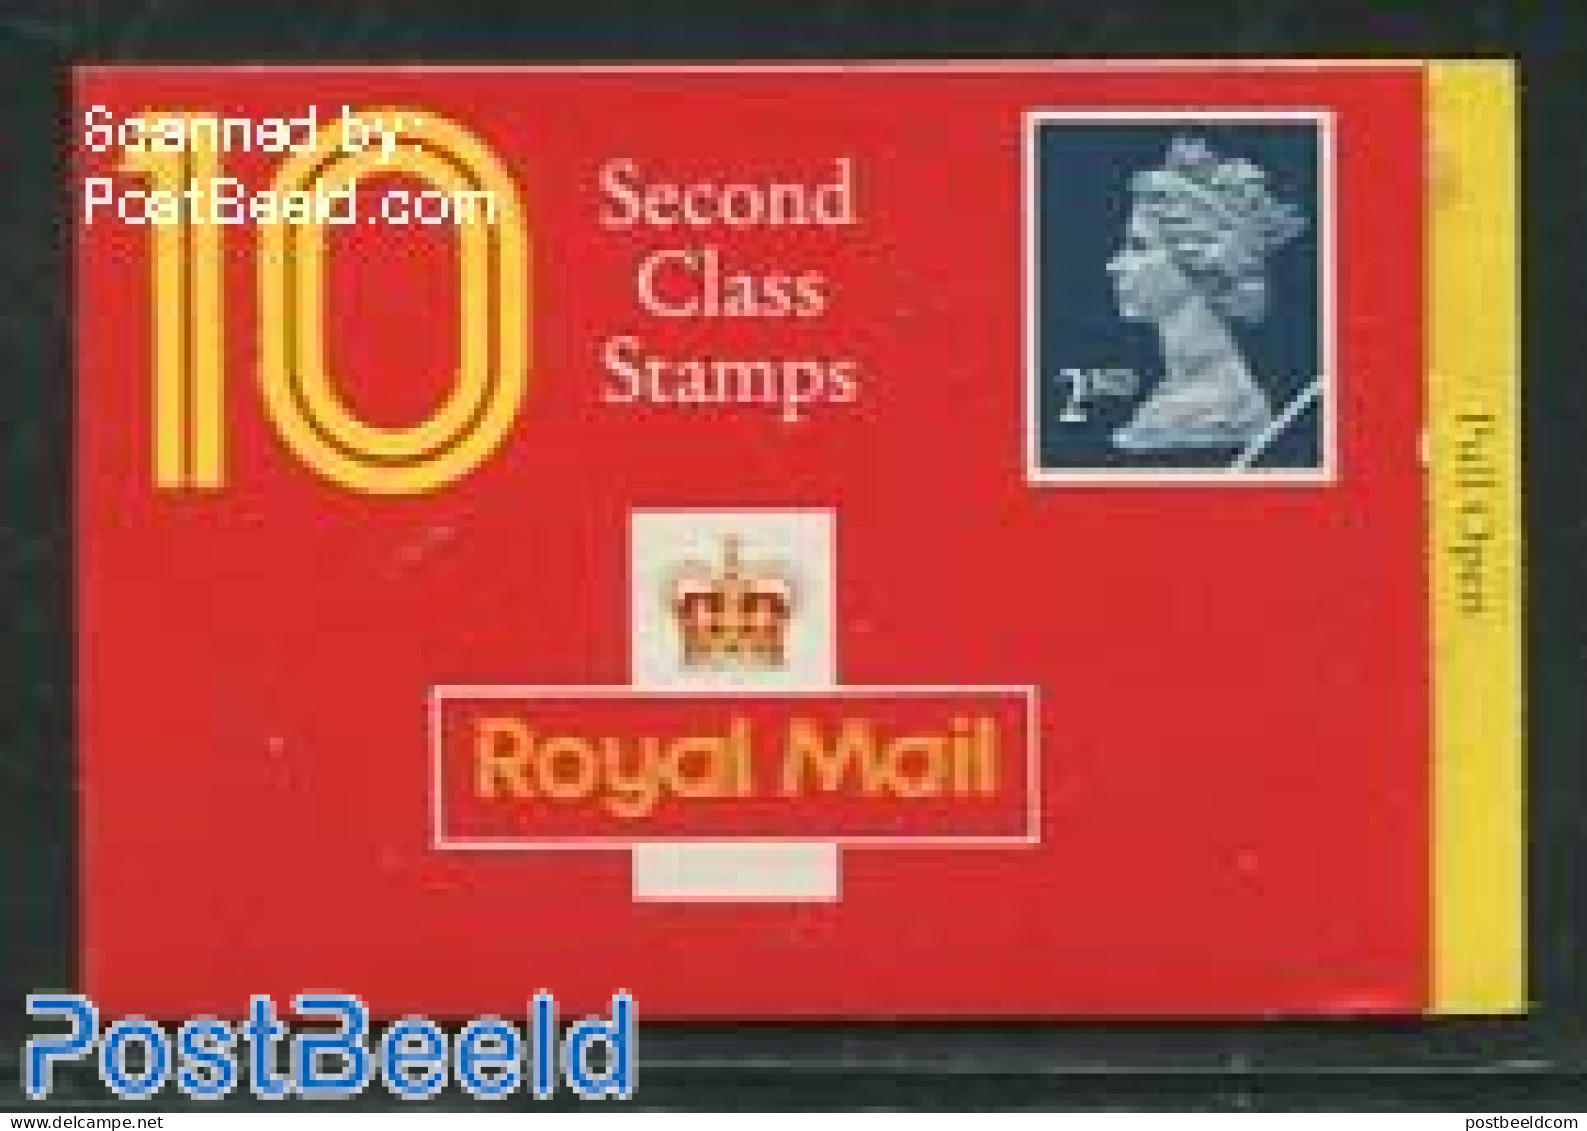 Great Britain 1990 10x 2nd Booklet, House Of Questa, Mint NH, Stamp Booklets - Unused Stamps